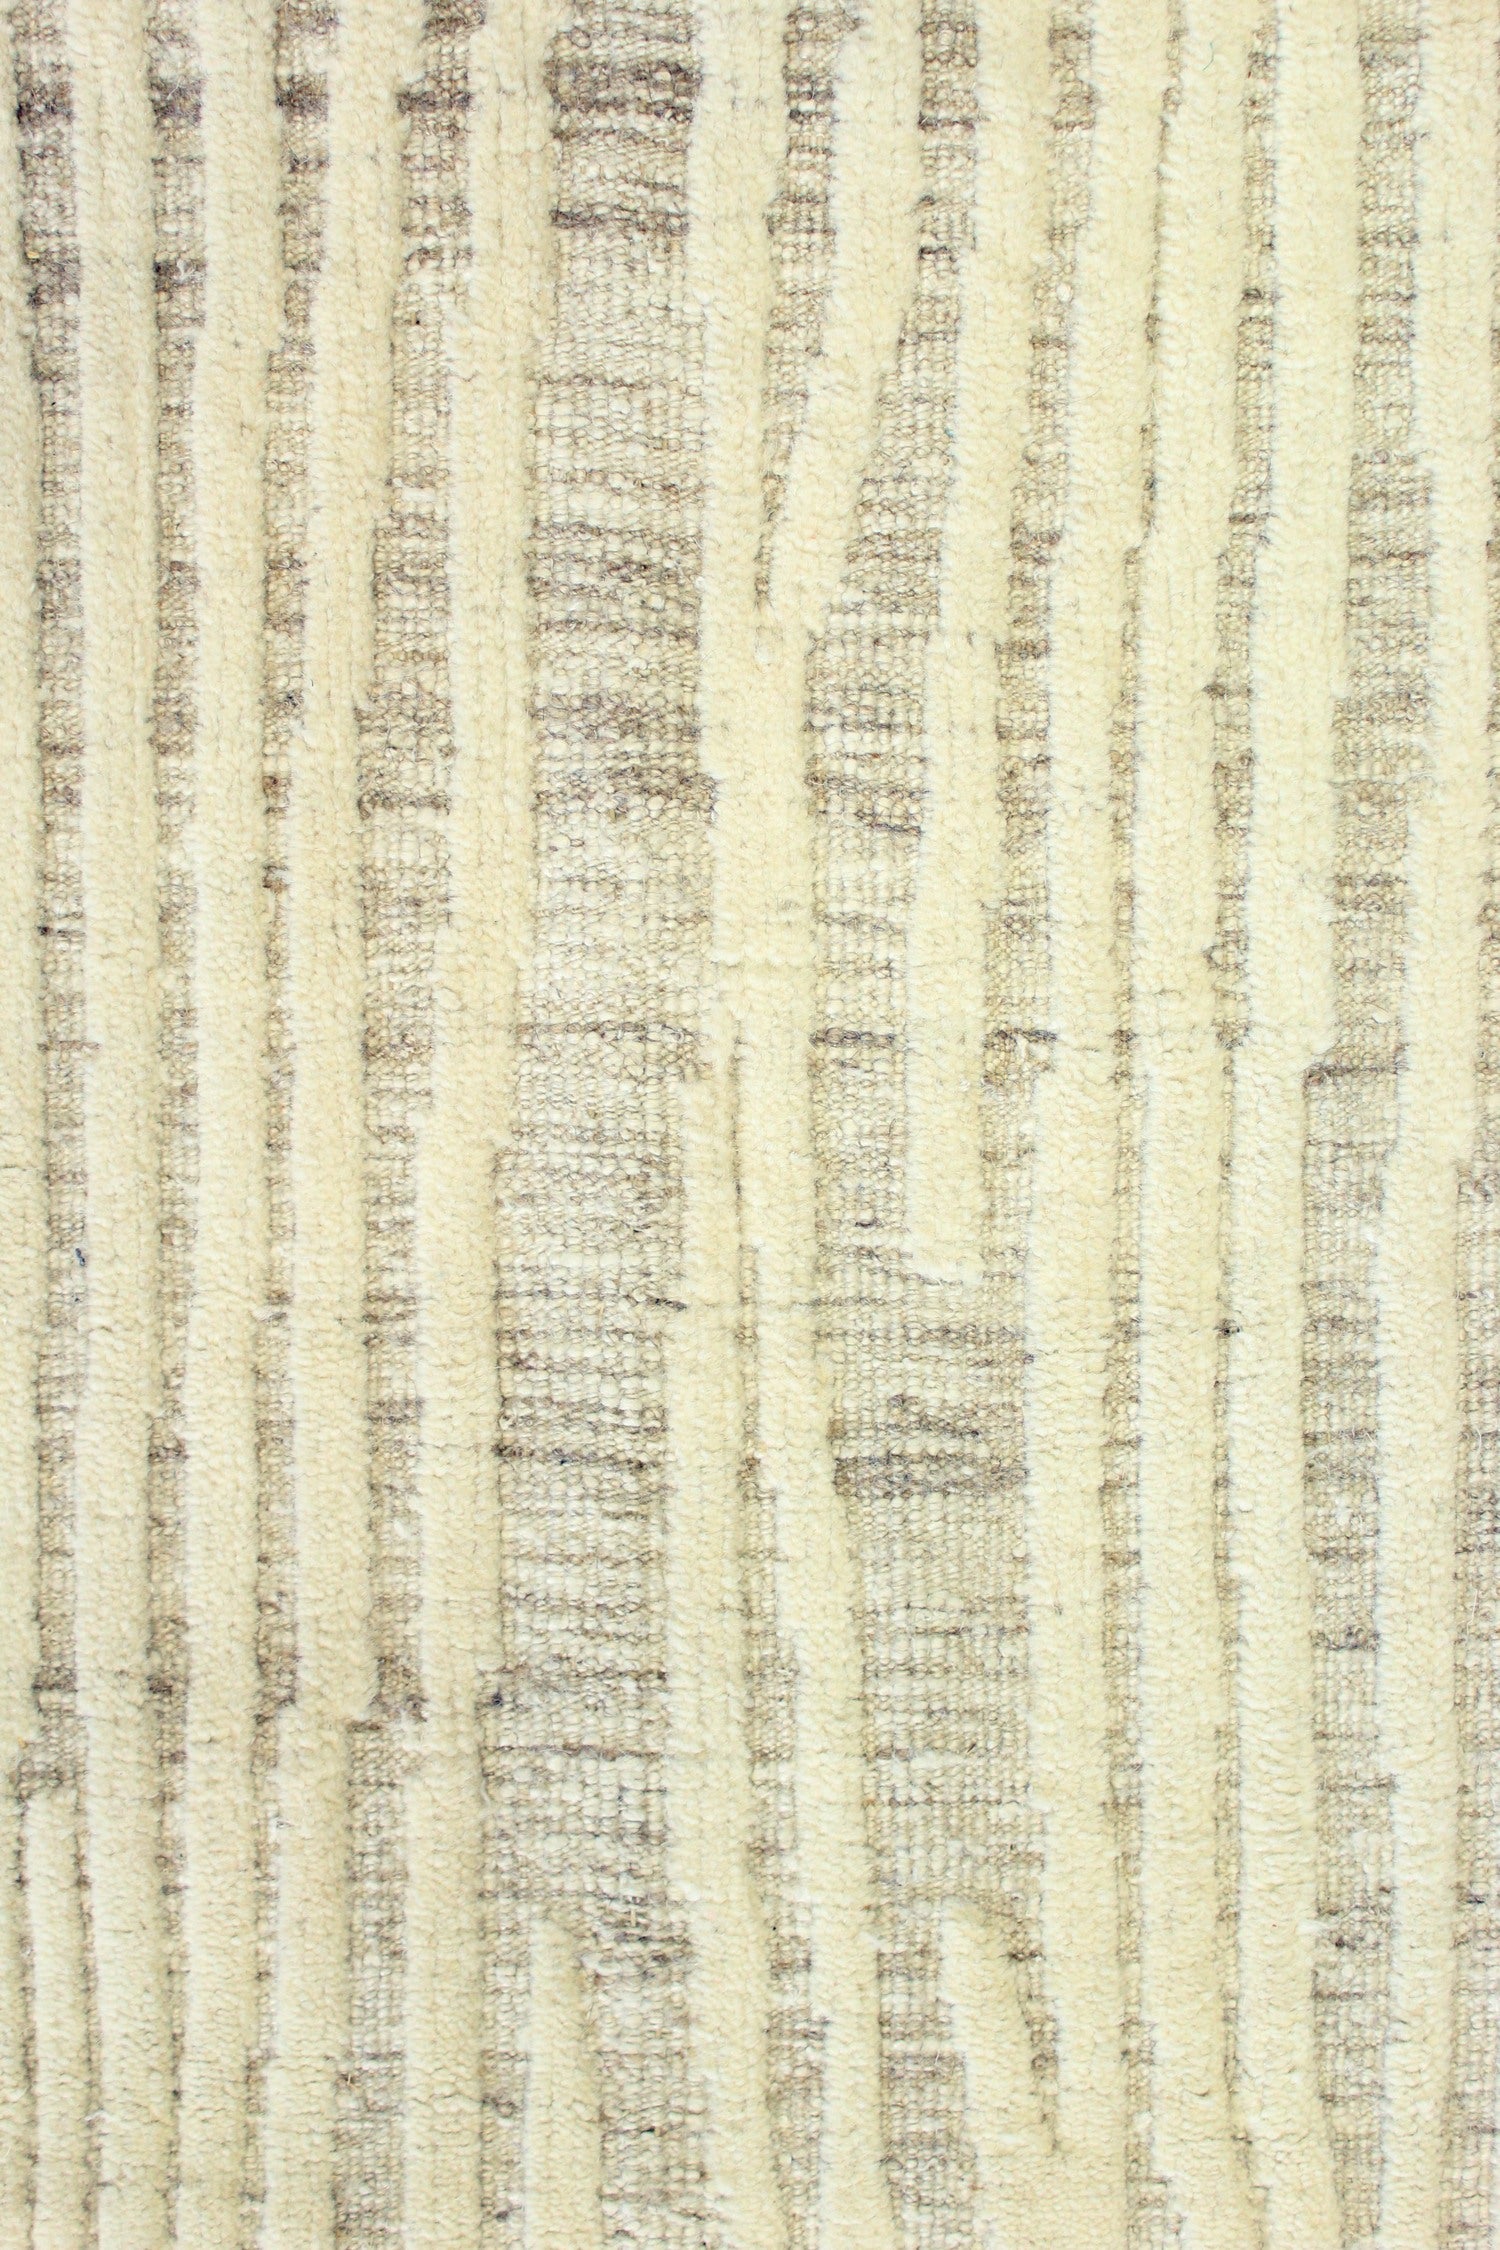 Thicket Handwoven Contemporary Rug, J69435